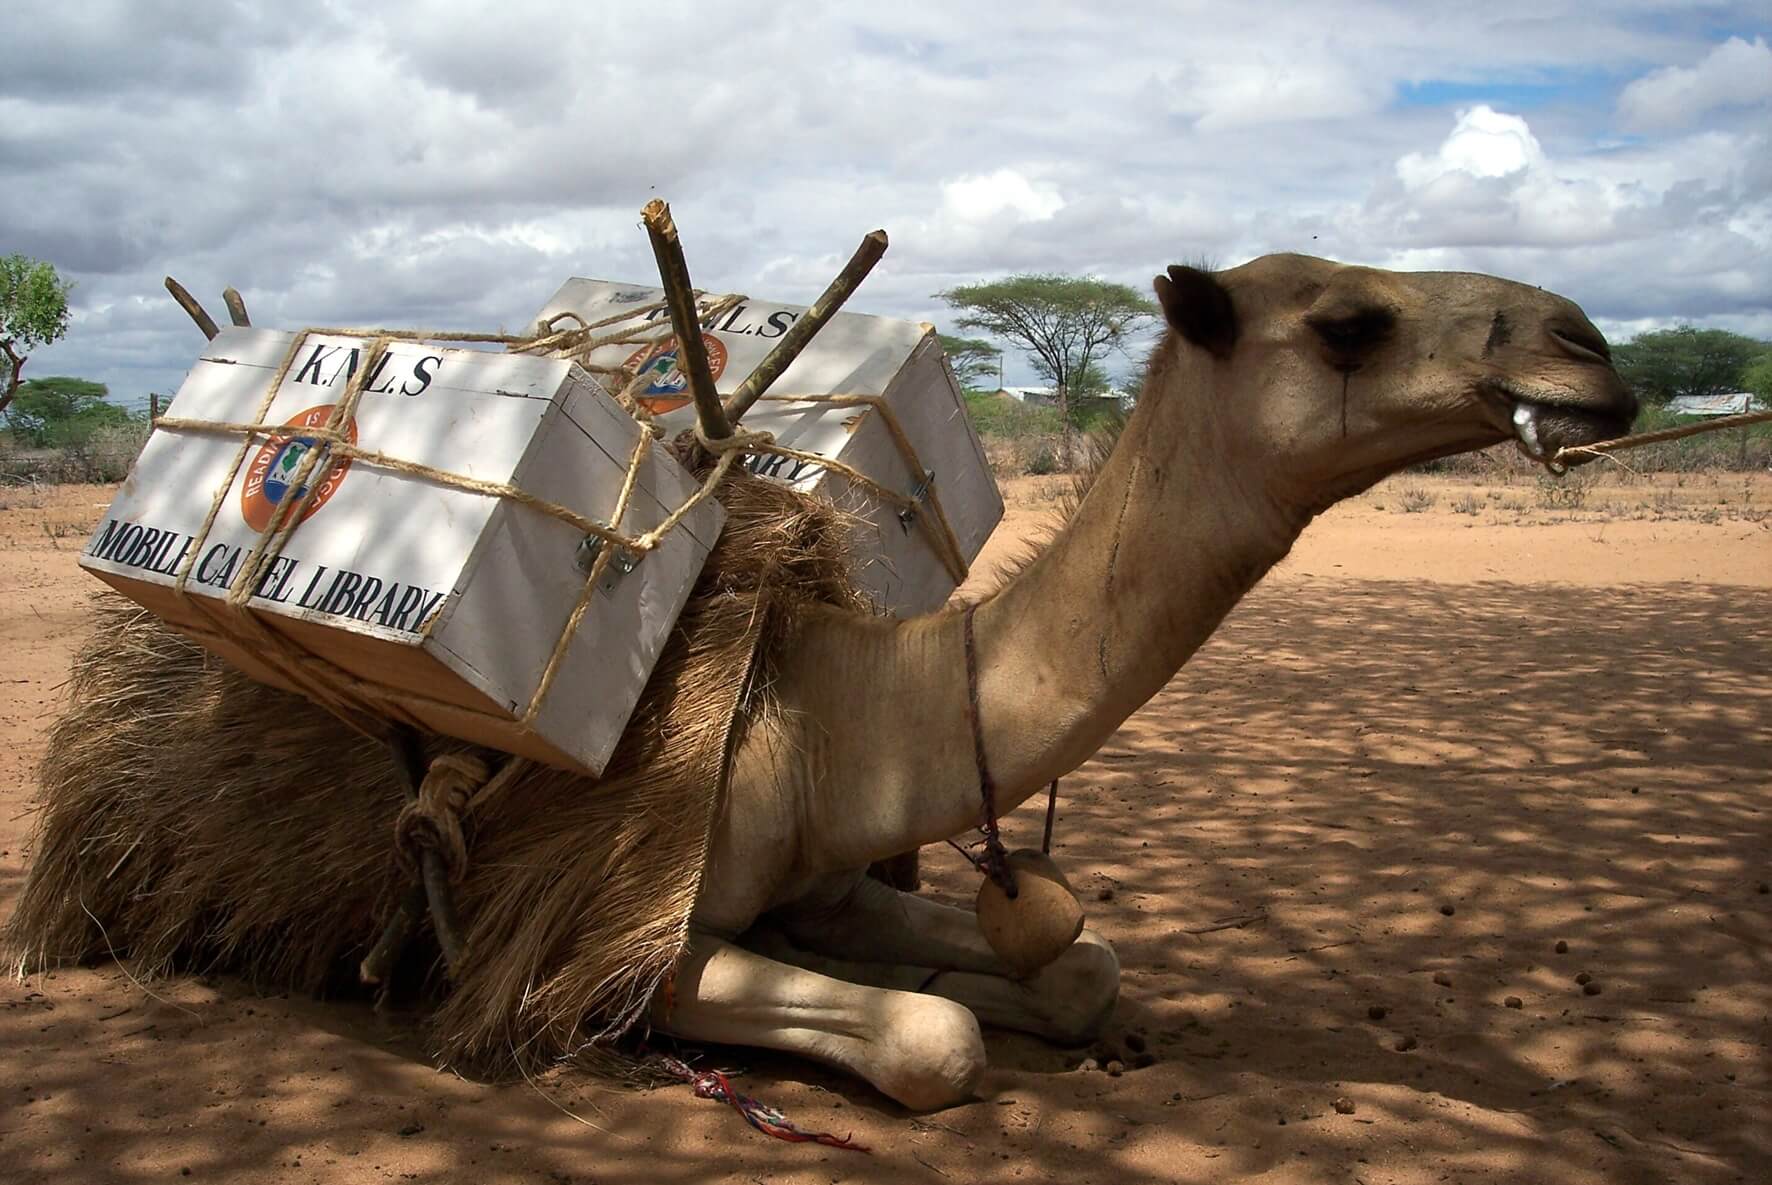 A Camel Library The Book mobile: Mobile Libraries in Kenya